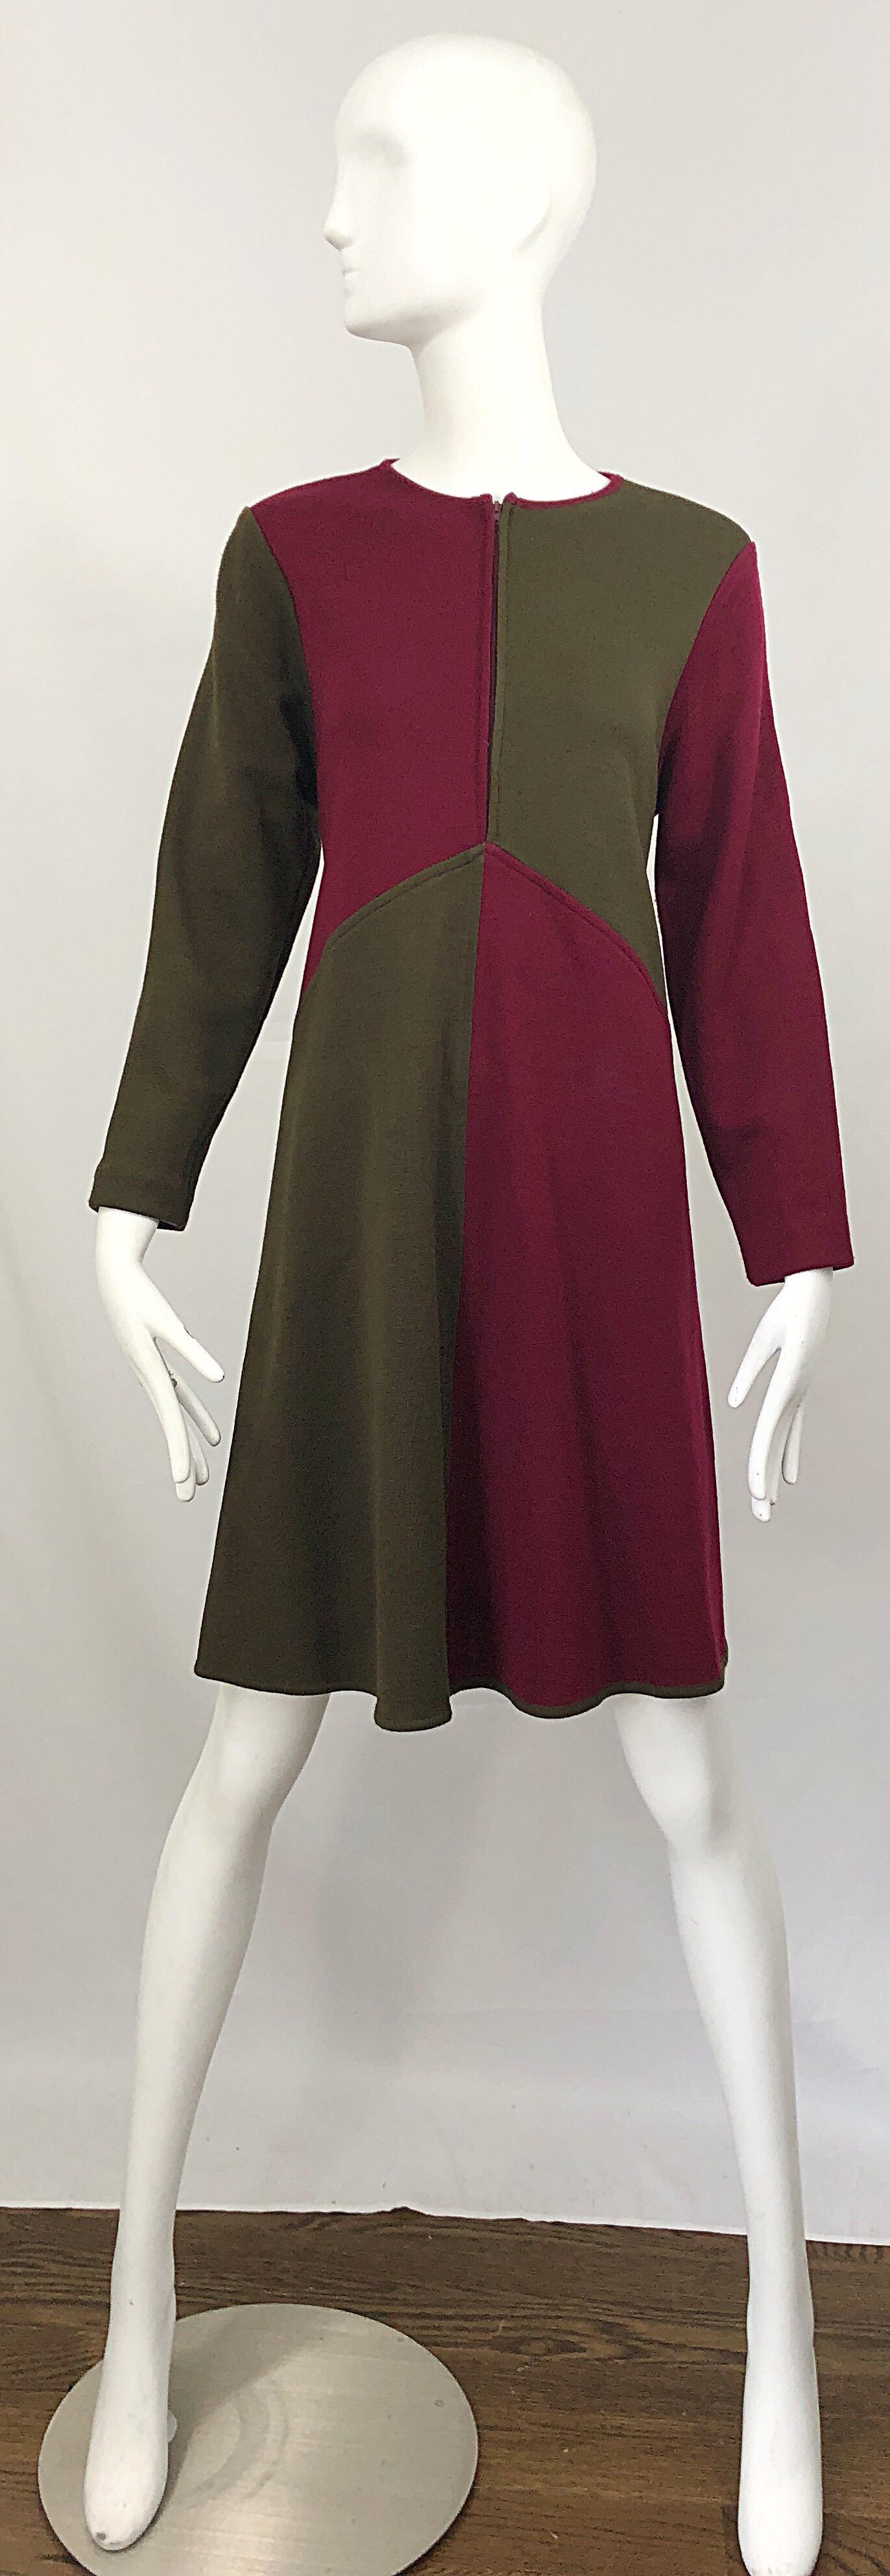 Chic vintage HARVE BENARD by BENARD HOLTZMAN 60s style long sleeve color block wool knit swing / Trapeze A-Line dress! Features a fitted bodice, with a forgiving full swing body. Panels of maroon / burgundy and brown. Hidden zipper up the front can